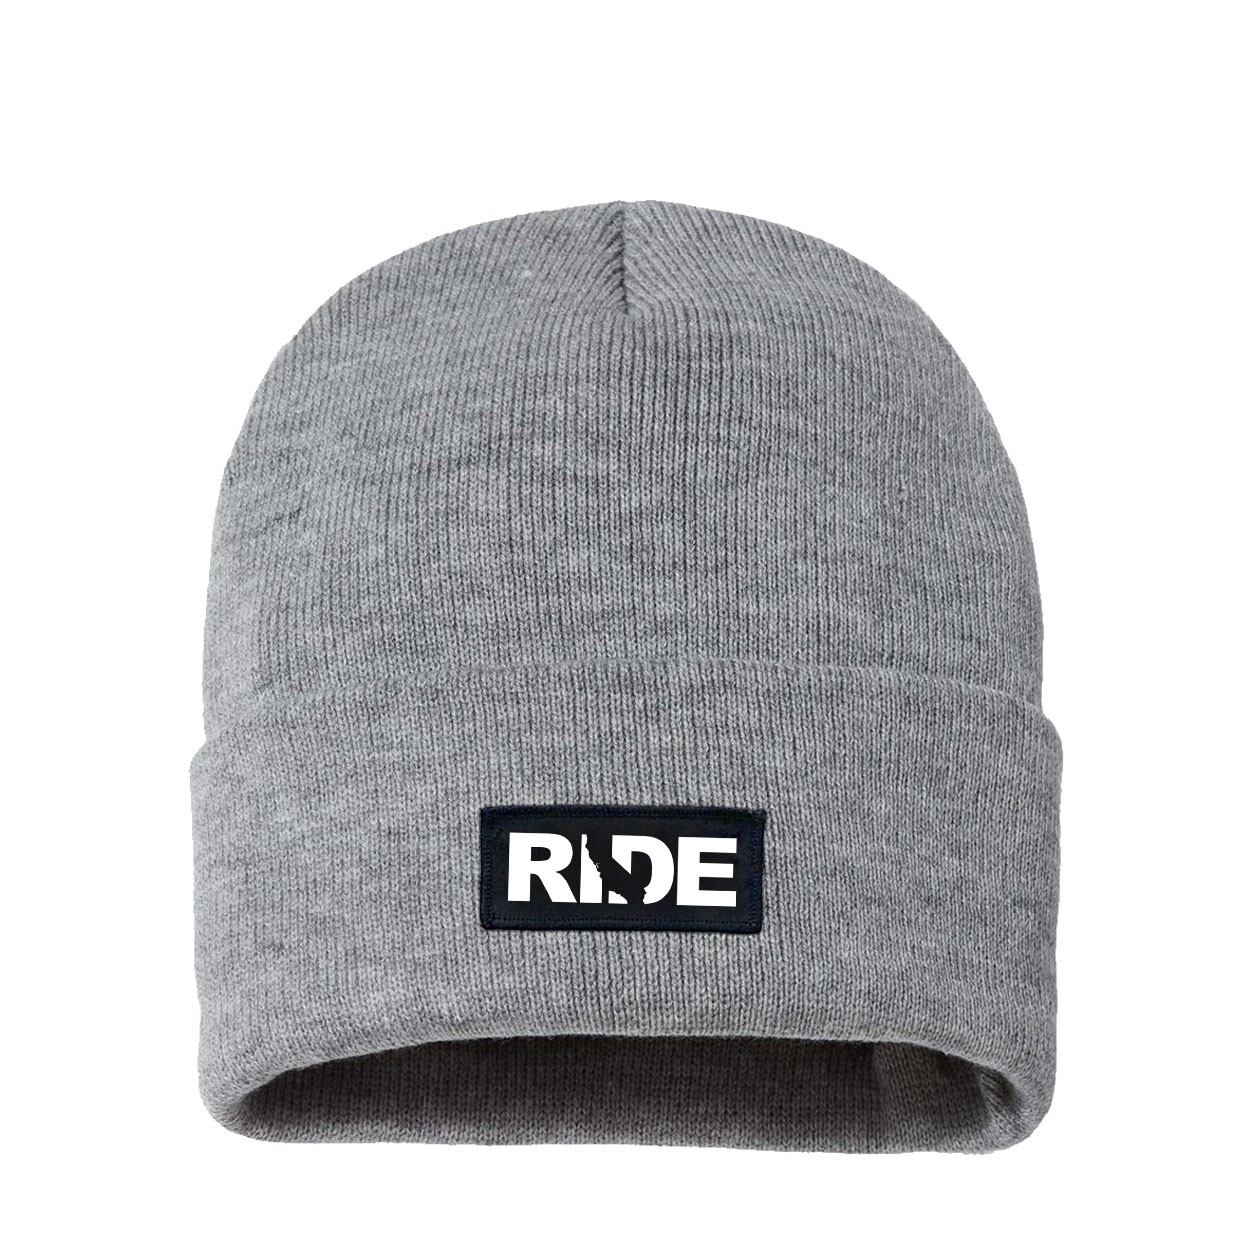 Ride California Night Out Woven Patch Night Out Sherpa Lined Cuffed Beanie Heather Gray (White Logo)